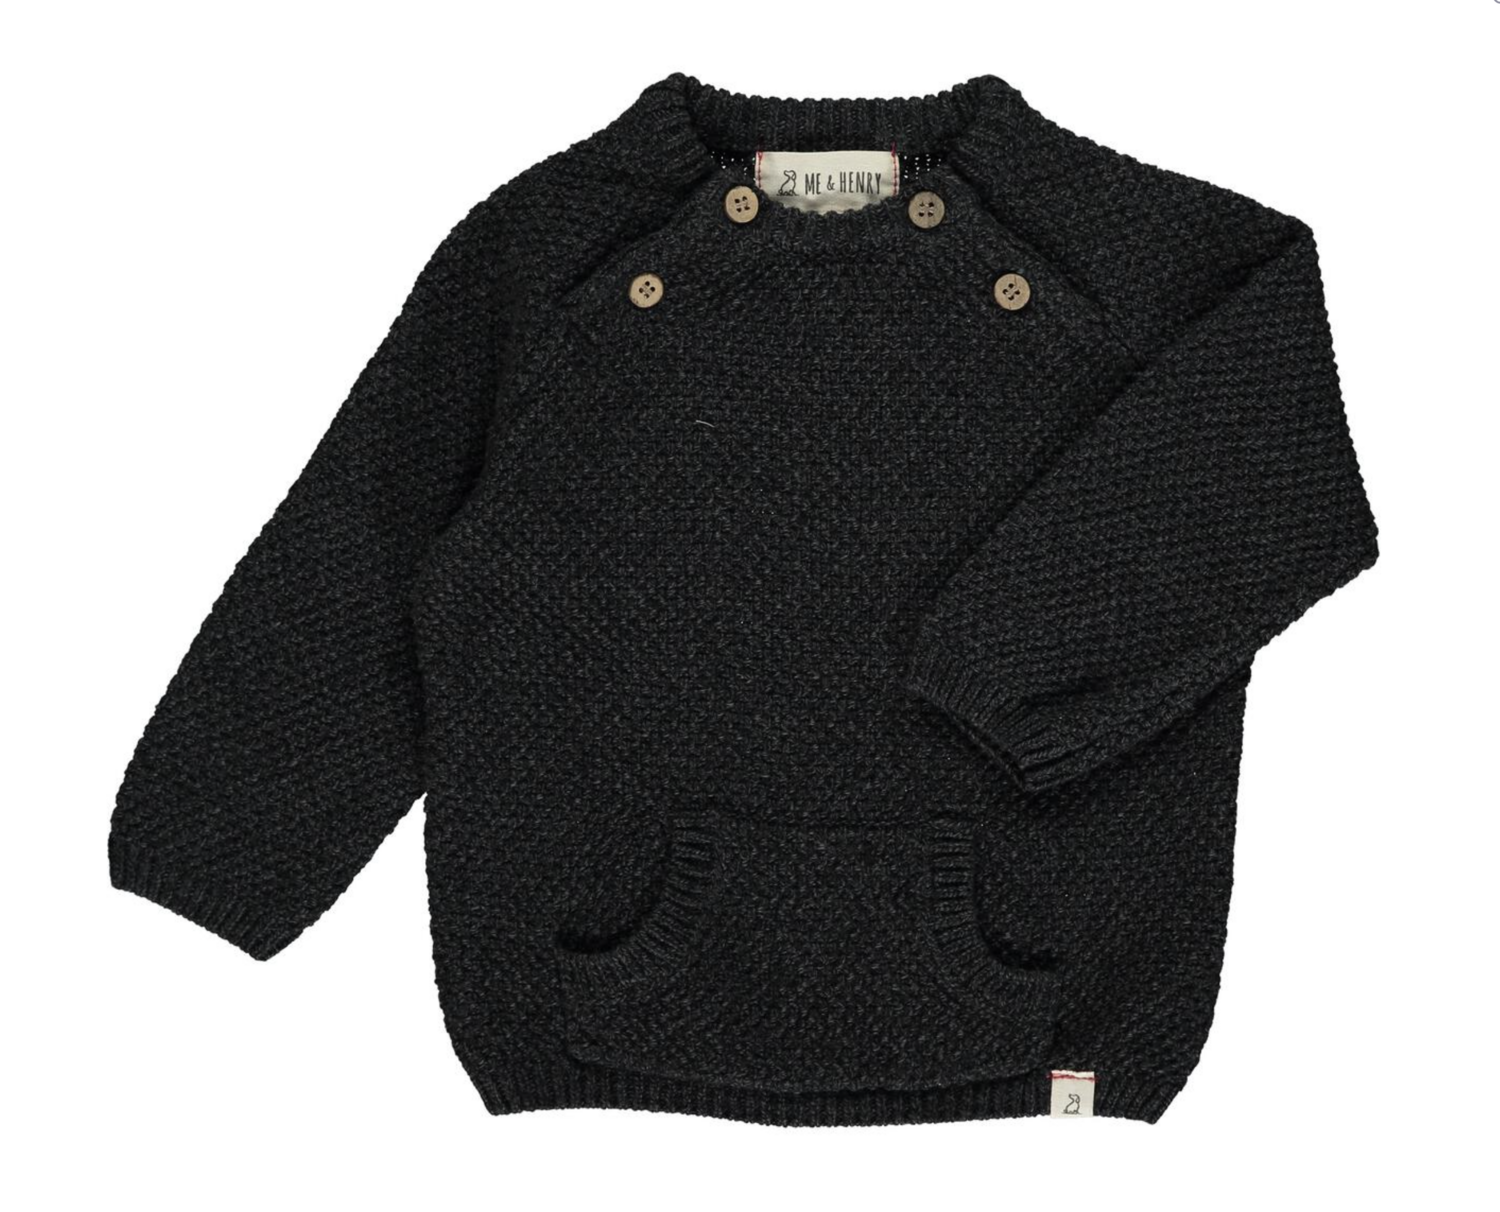 Me & Henry Morrison baby sweater charcoal